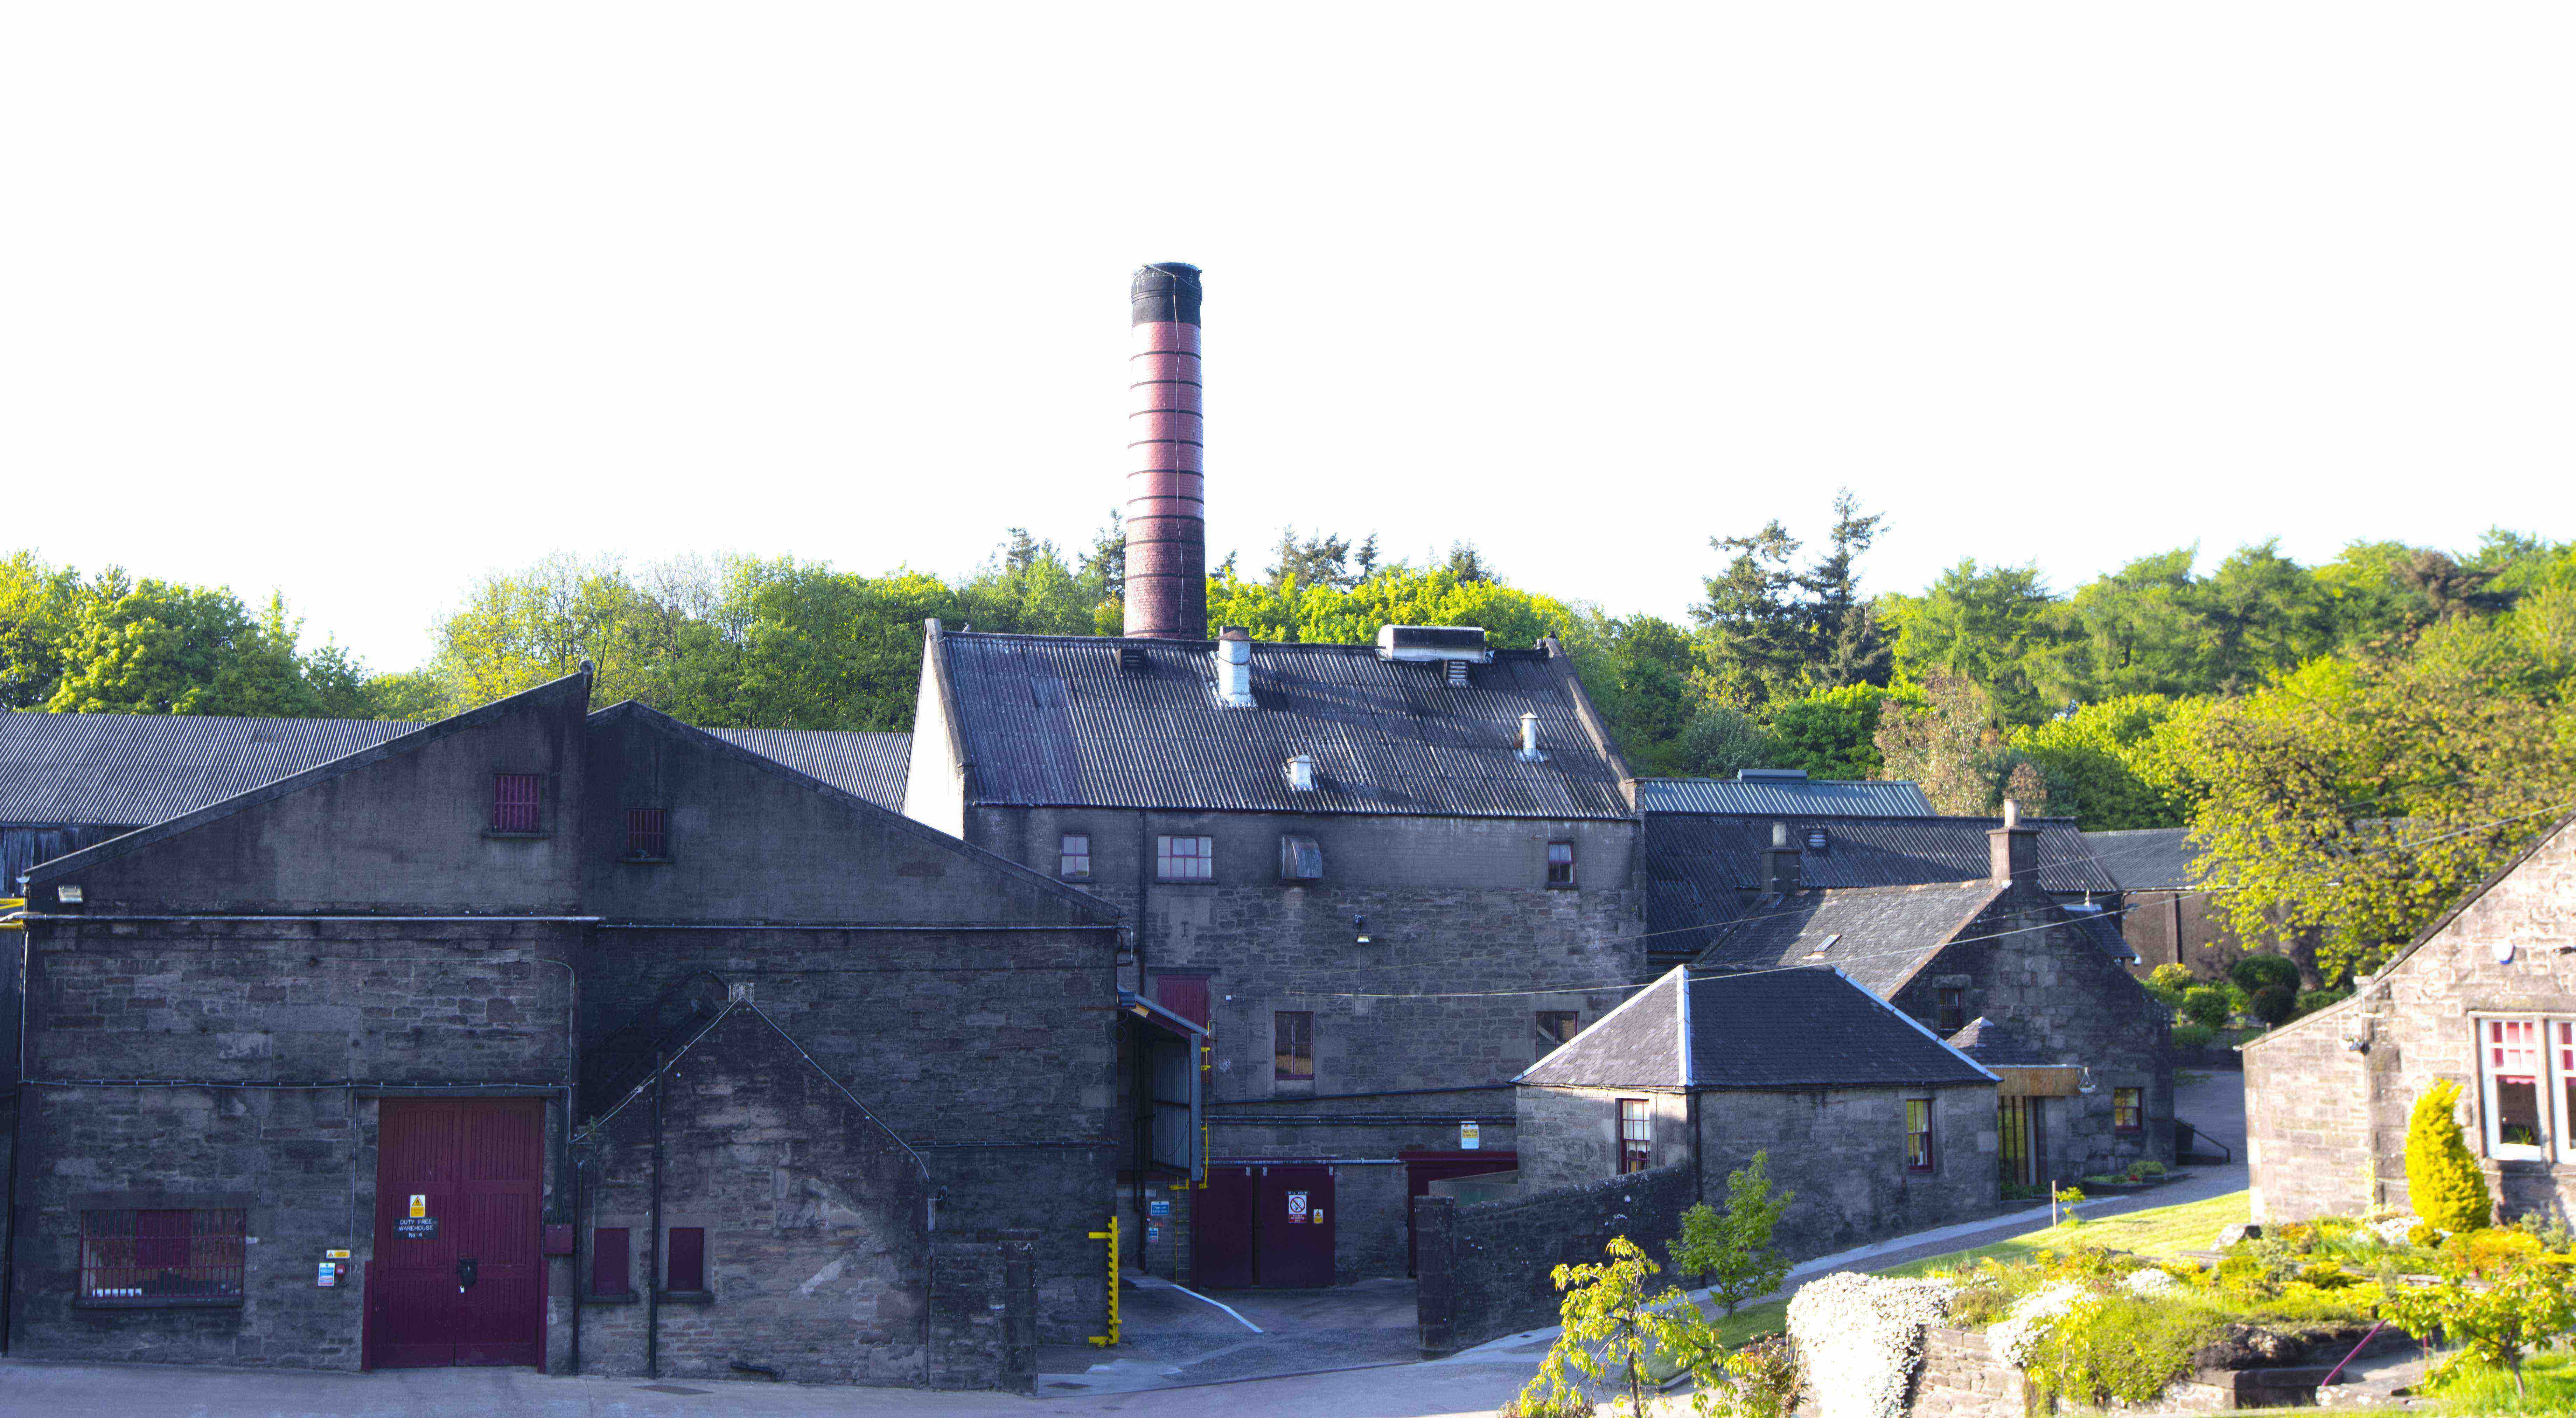 Plans lodged for visitor centre at the Glencadam Distillery in Brechin.